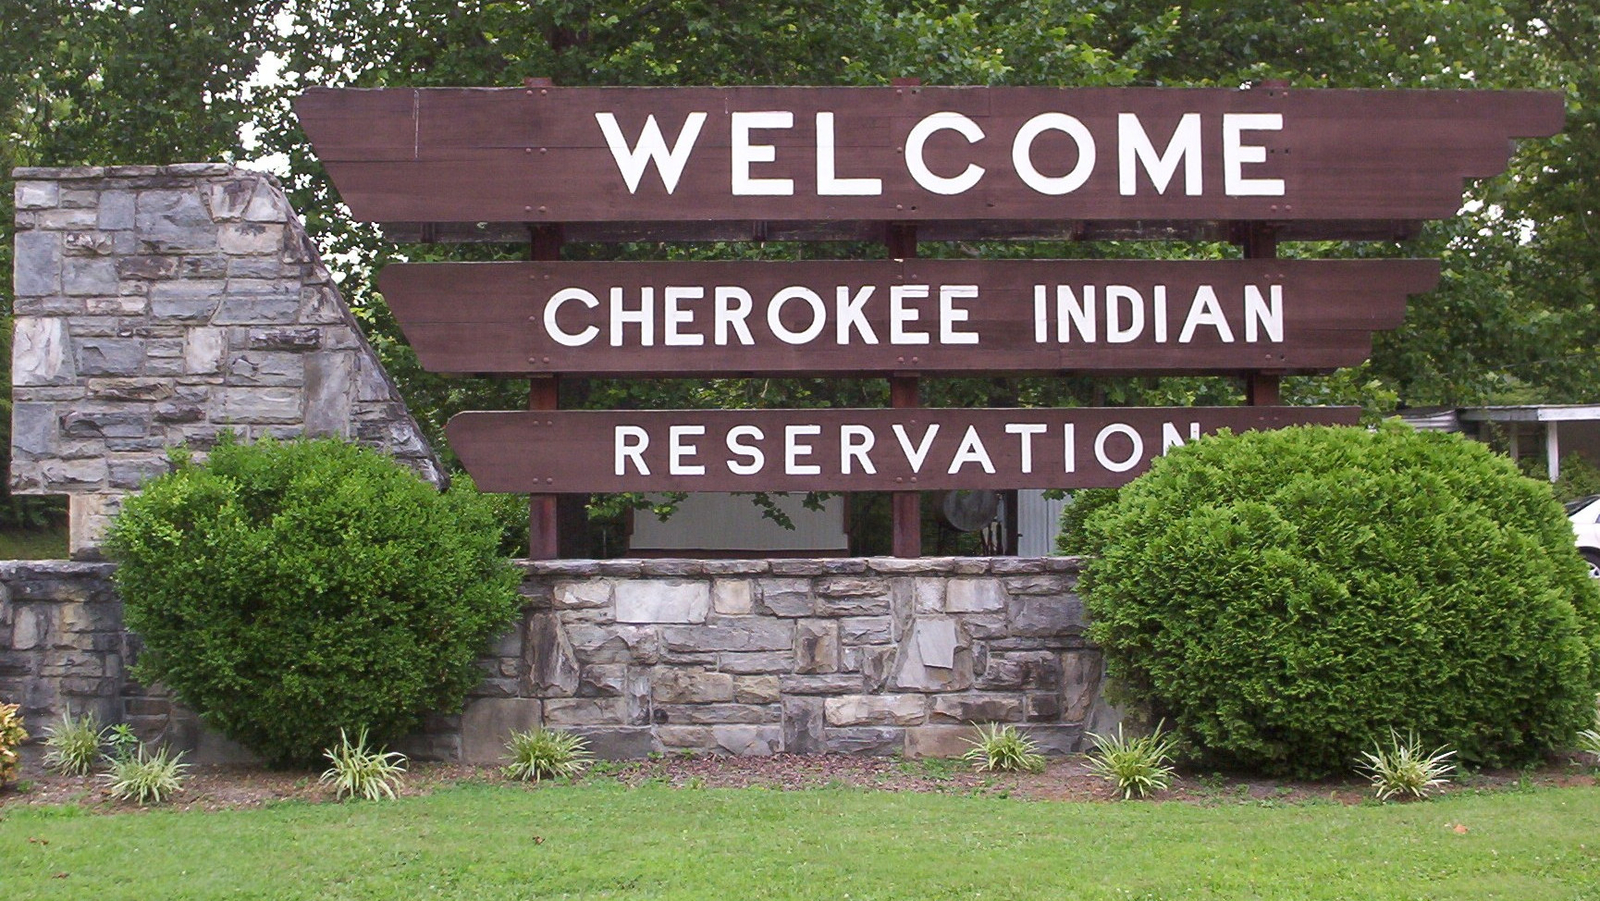 North Carolina Will Soon Get Legal Weed Thanks to the Cherokee Nation